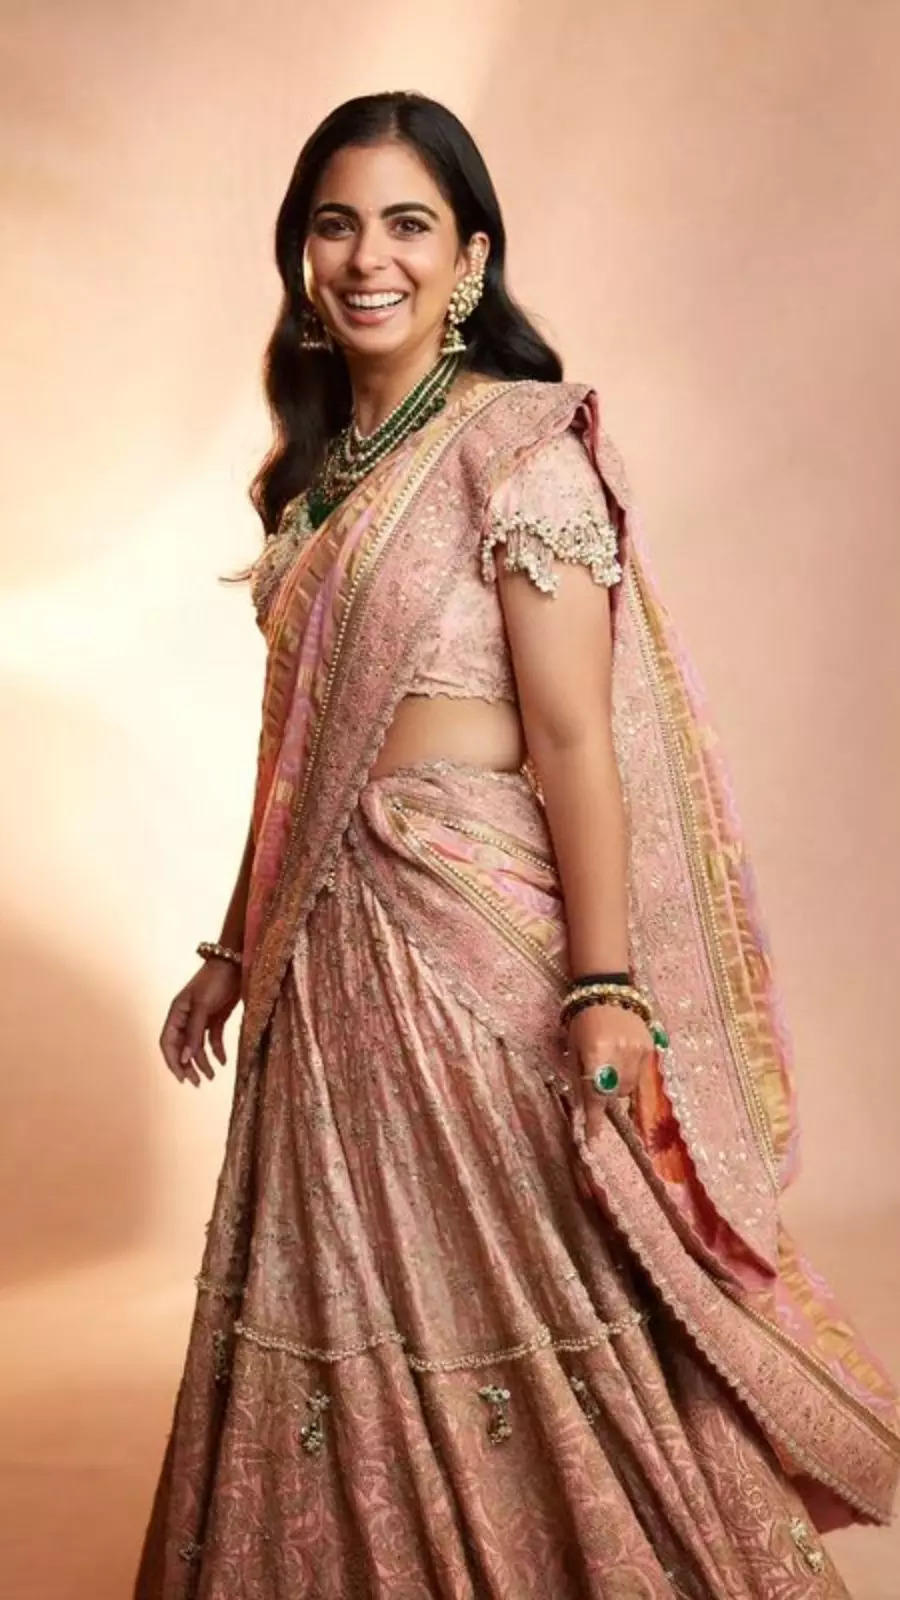 Radhika Merchant is a sight to behold in pink saree with sequined